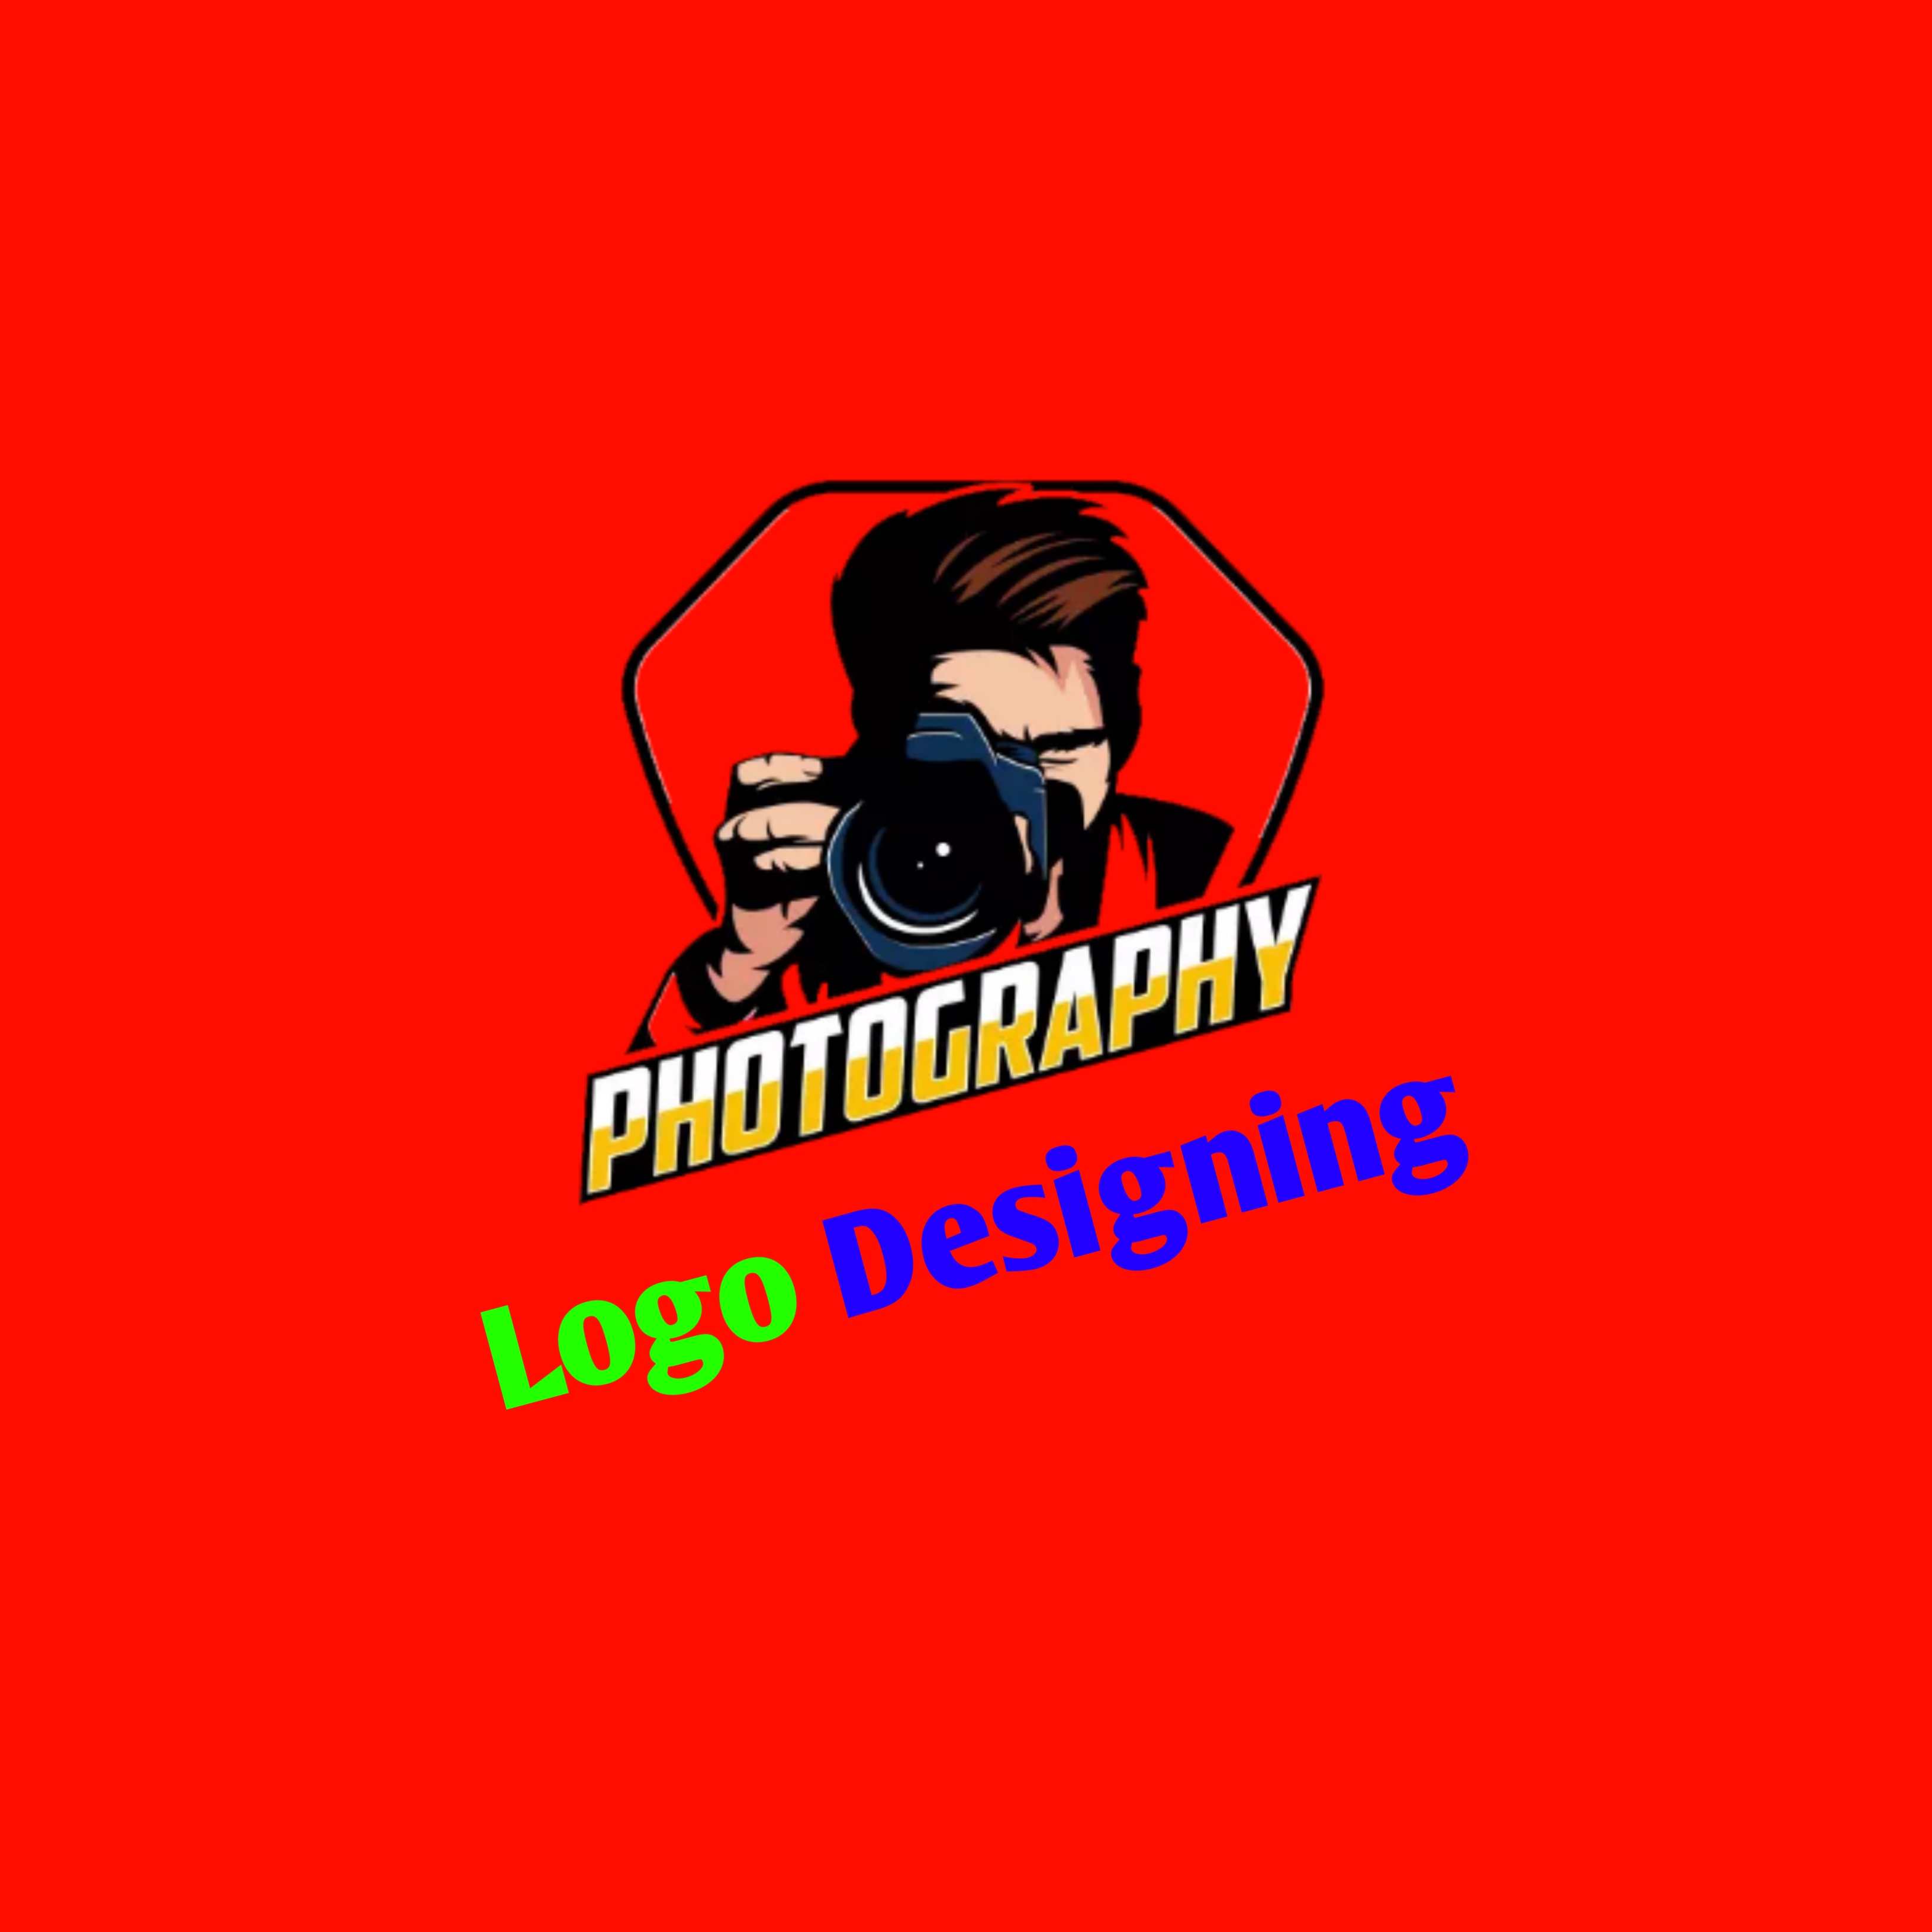 I will design professional logo for all categories.